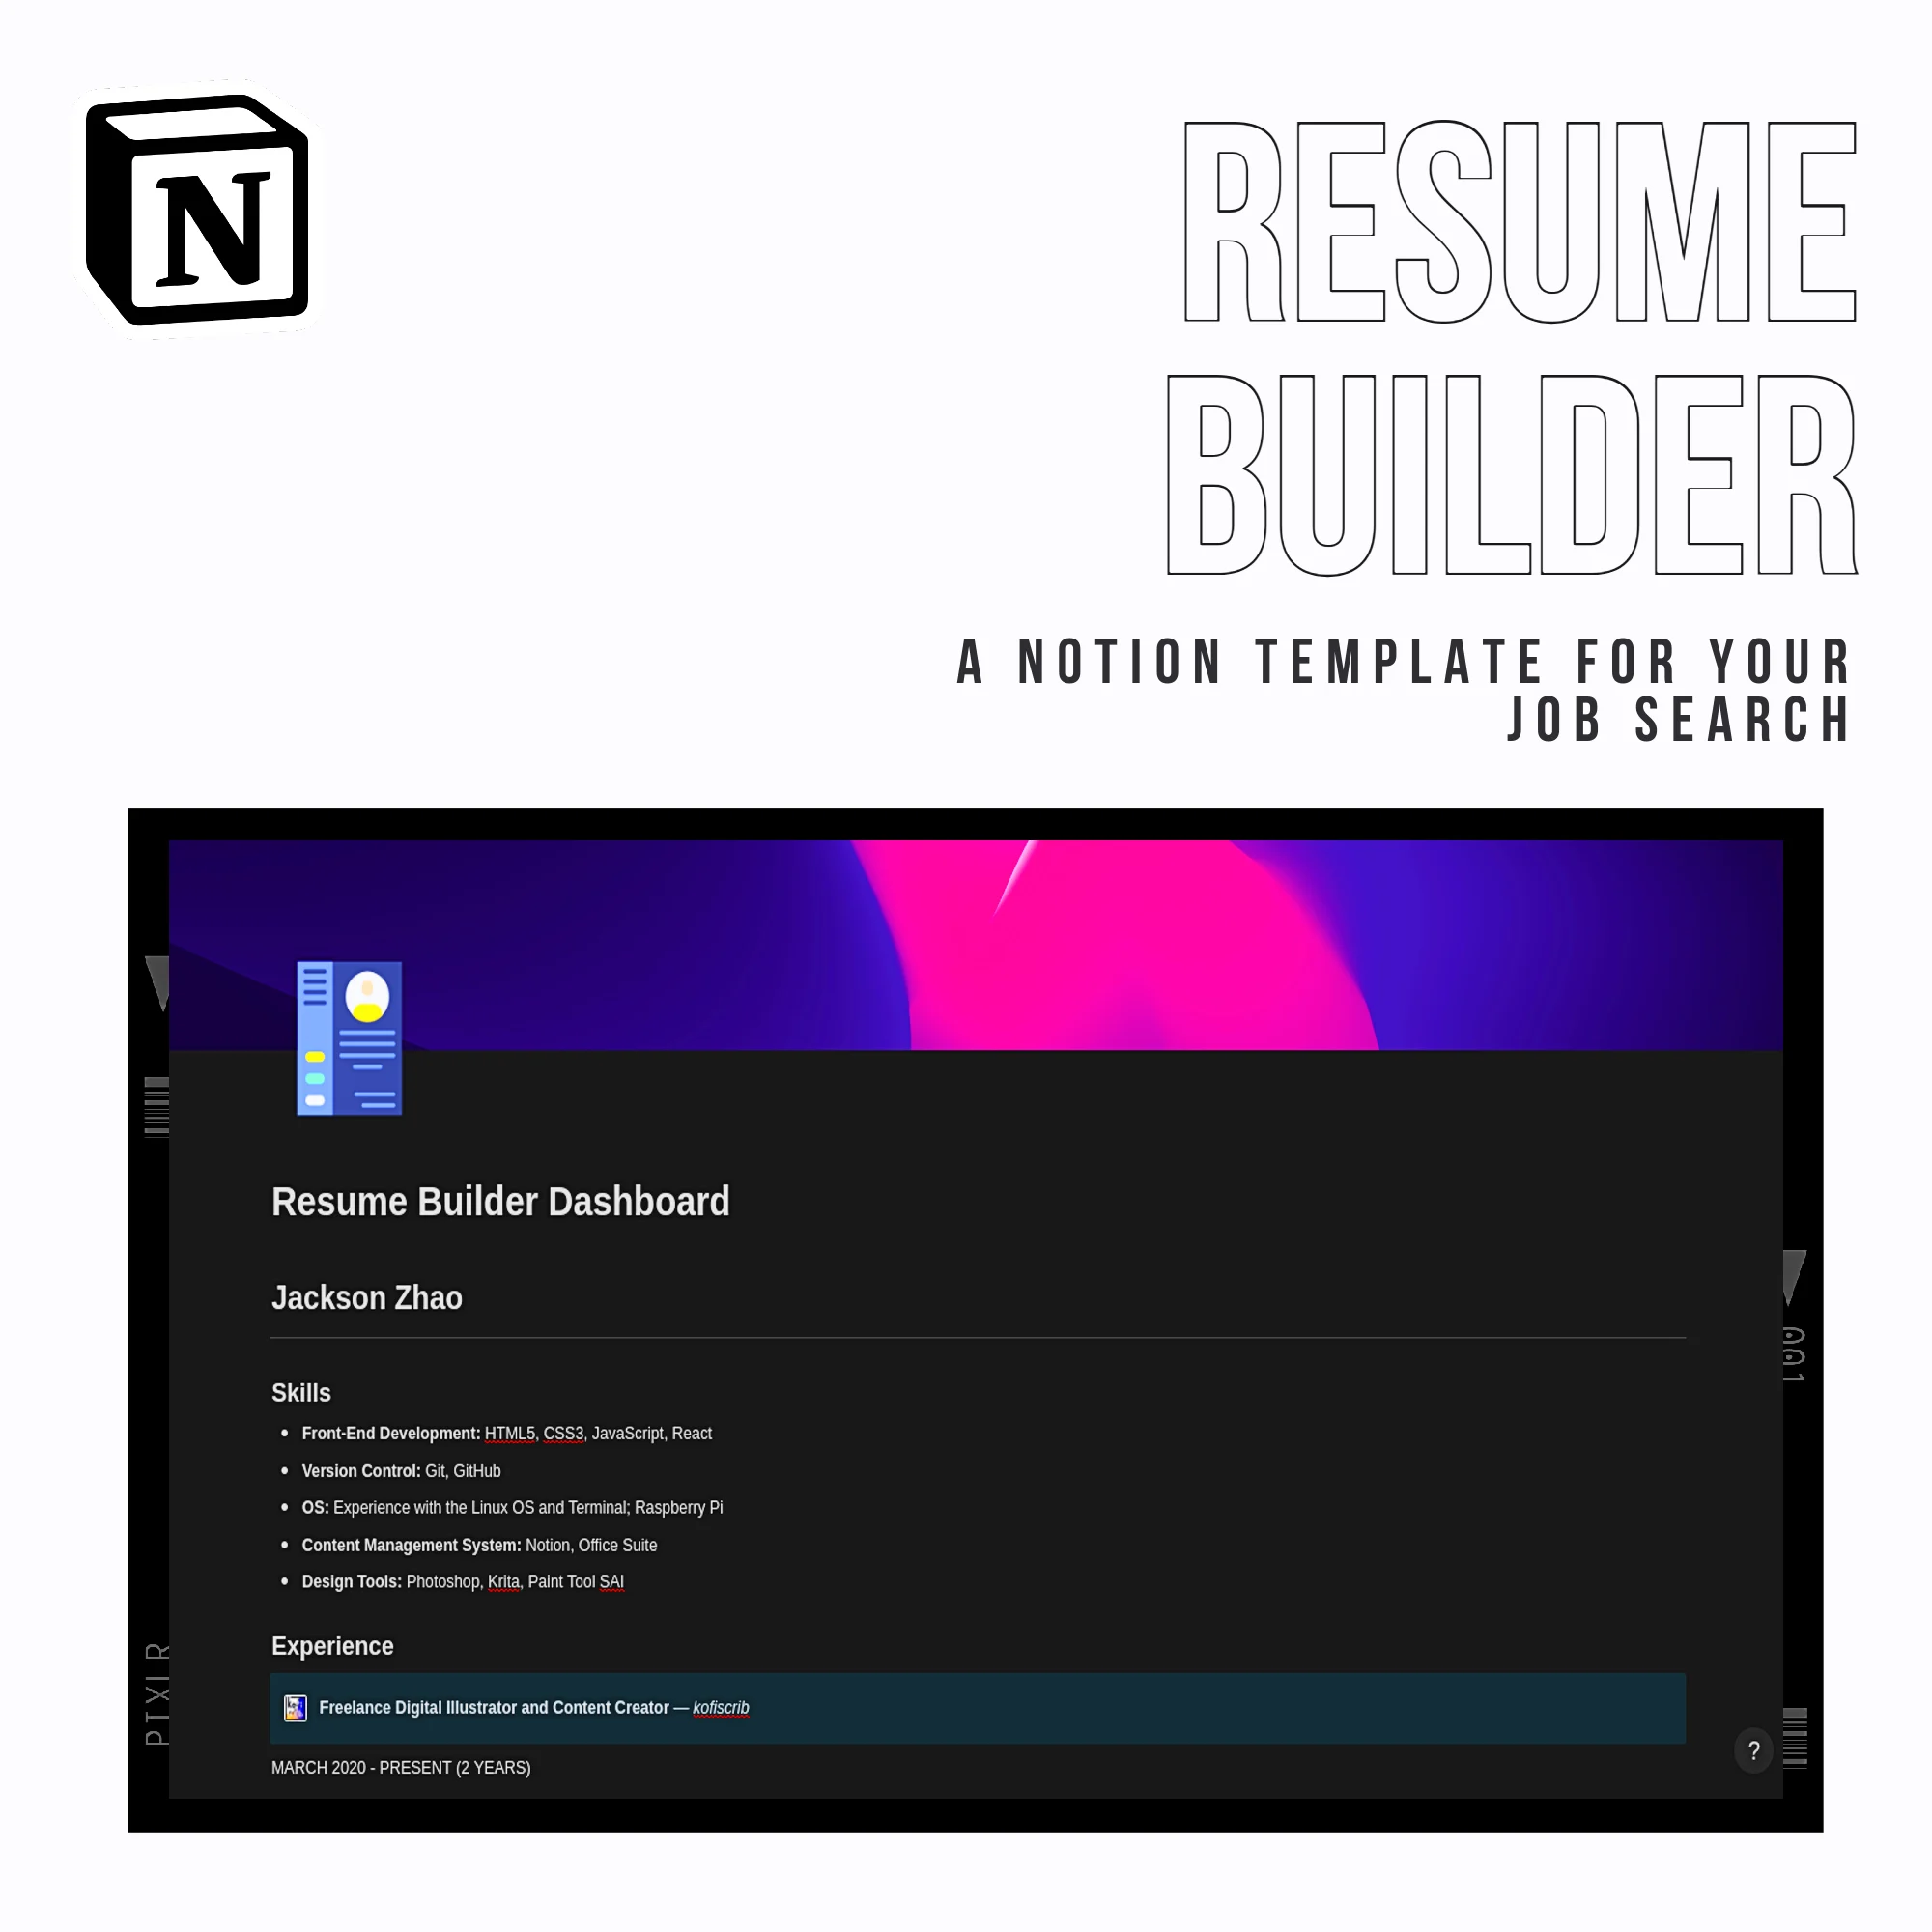 Notion_Template_for_Resume_Building